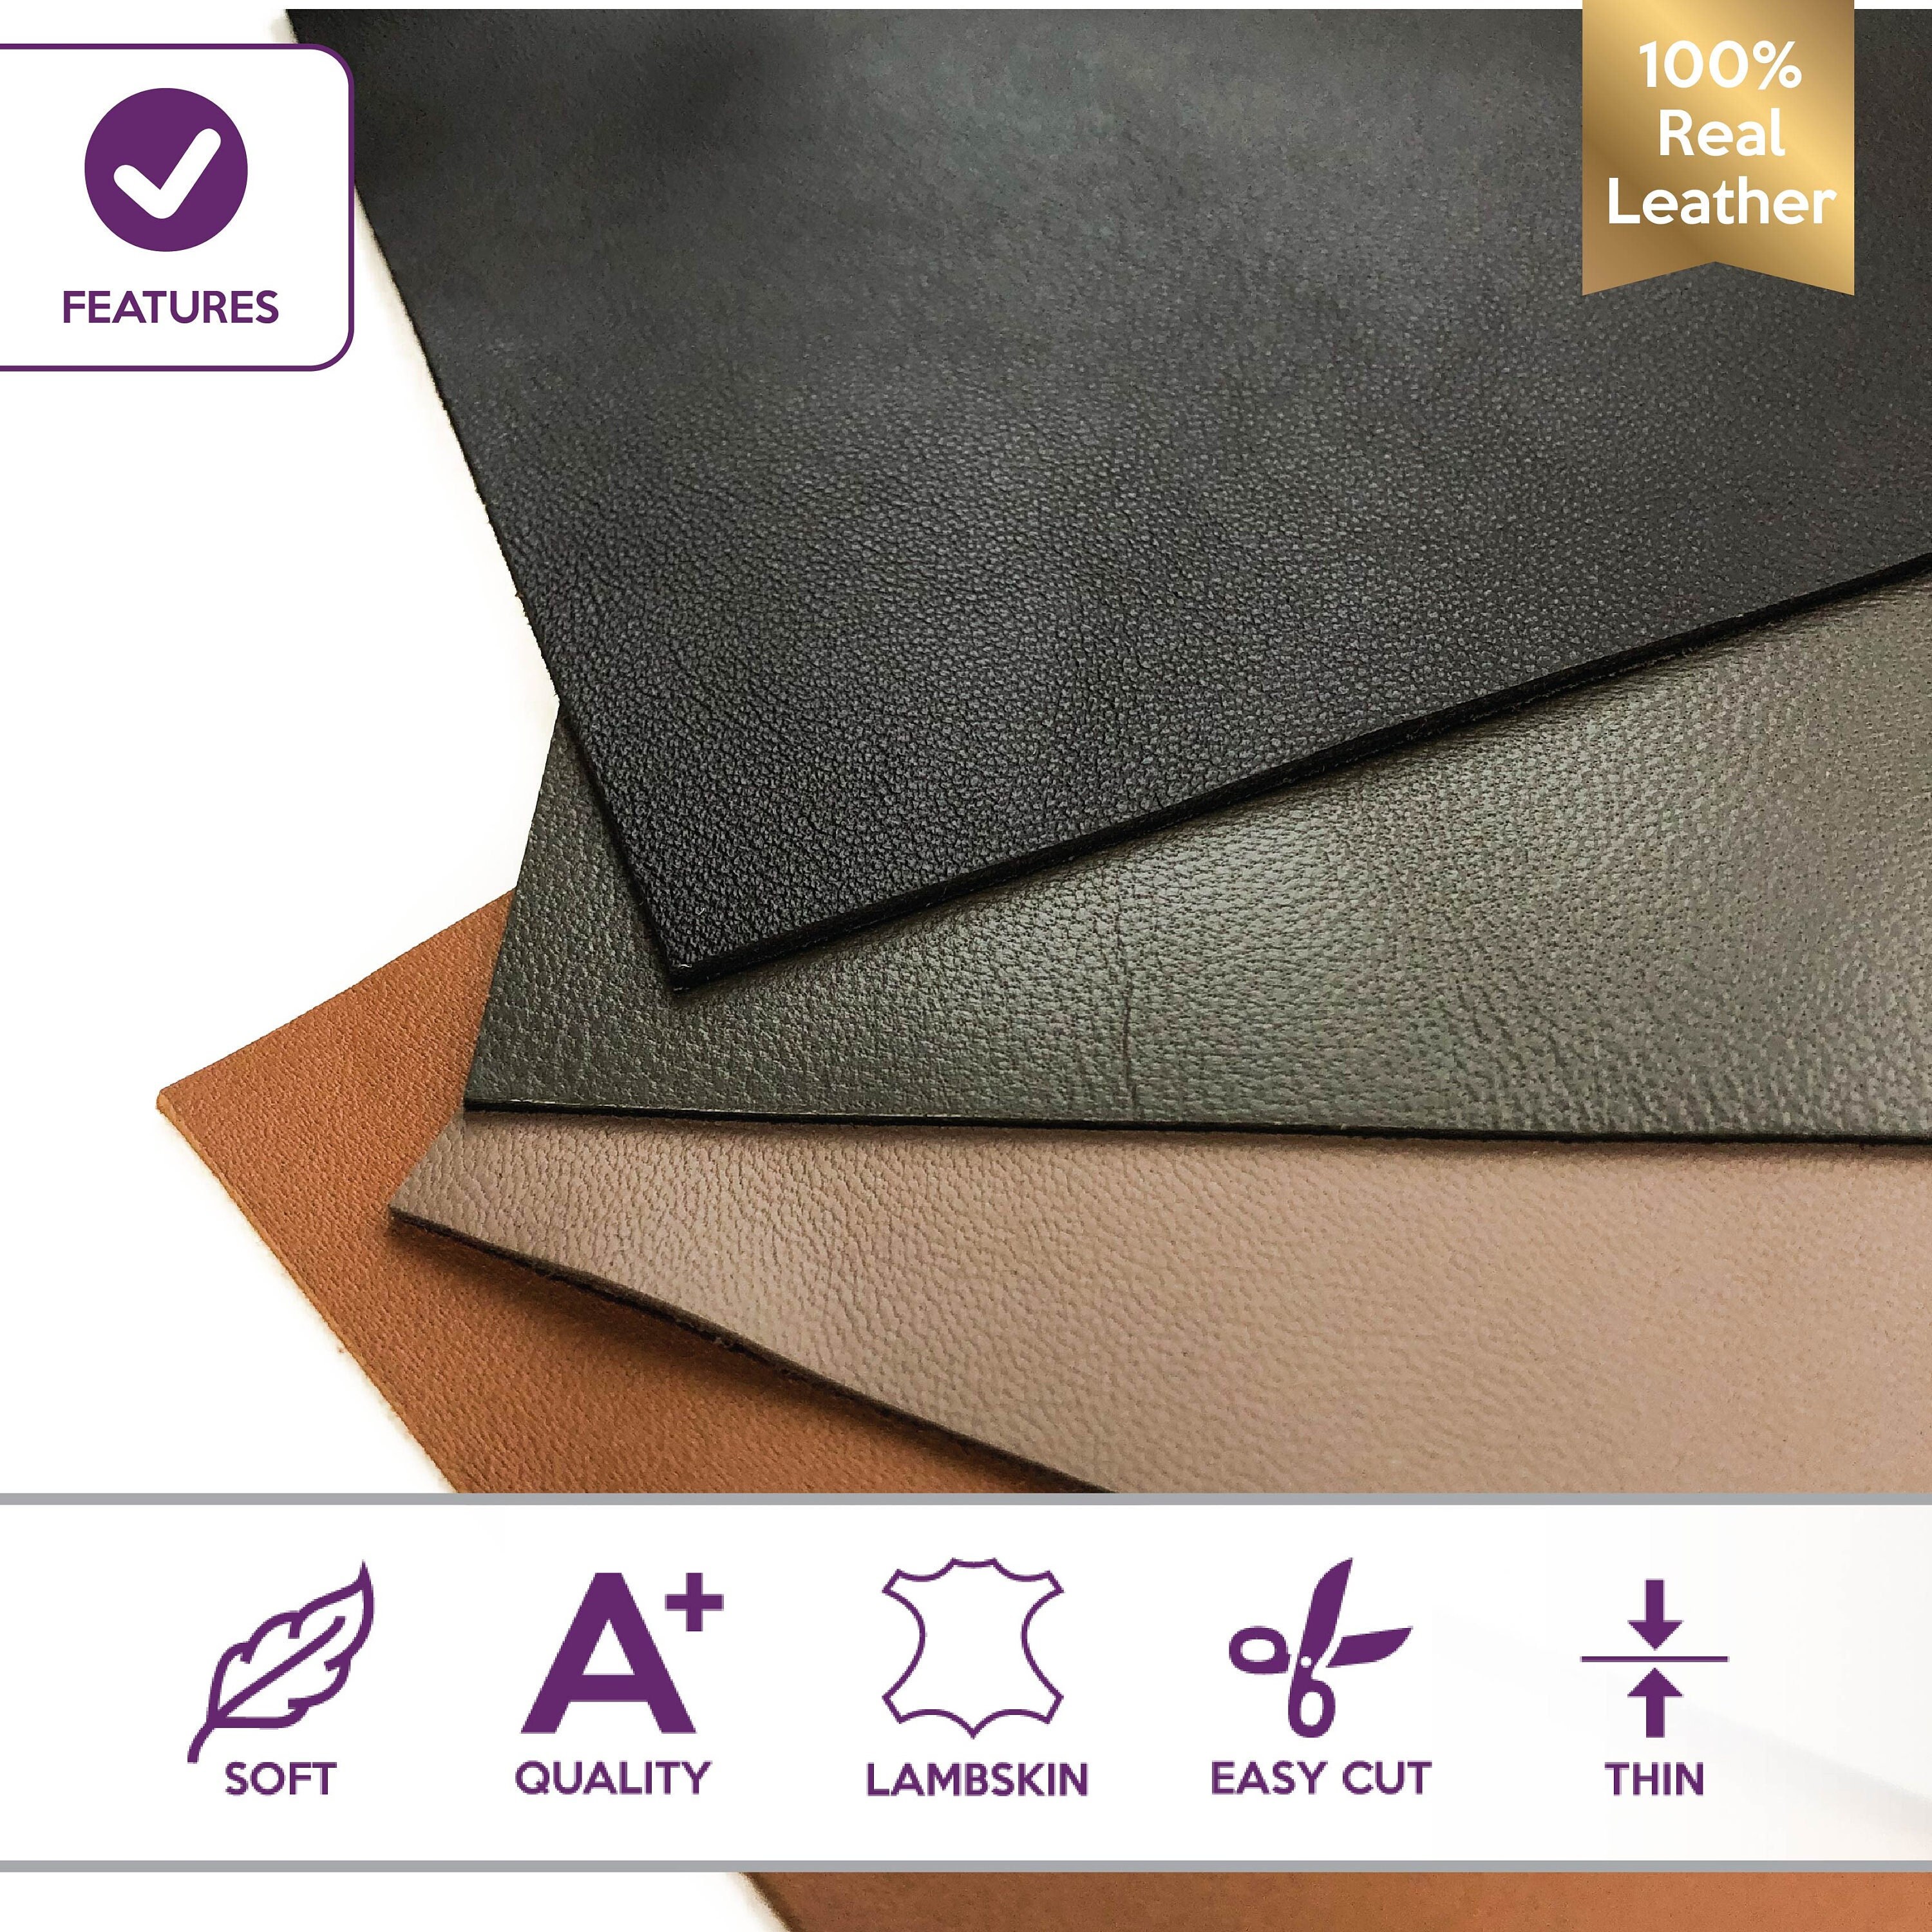 LeatherAA Italian Leather Company Brown Leather Hide Leather Sheets: 4 Brown Scrap Leather Pieces Leather Sheets for Craft 5x5In/ 12x12cm